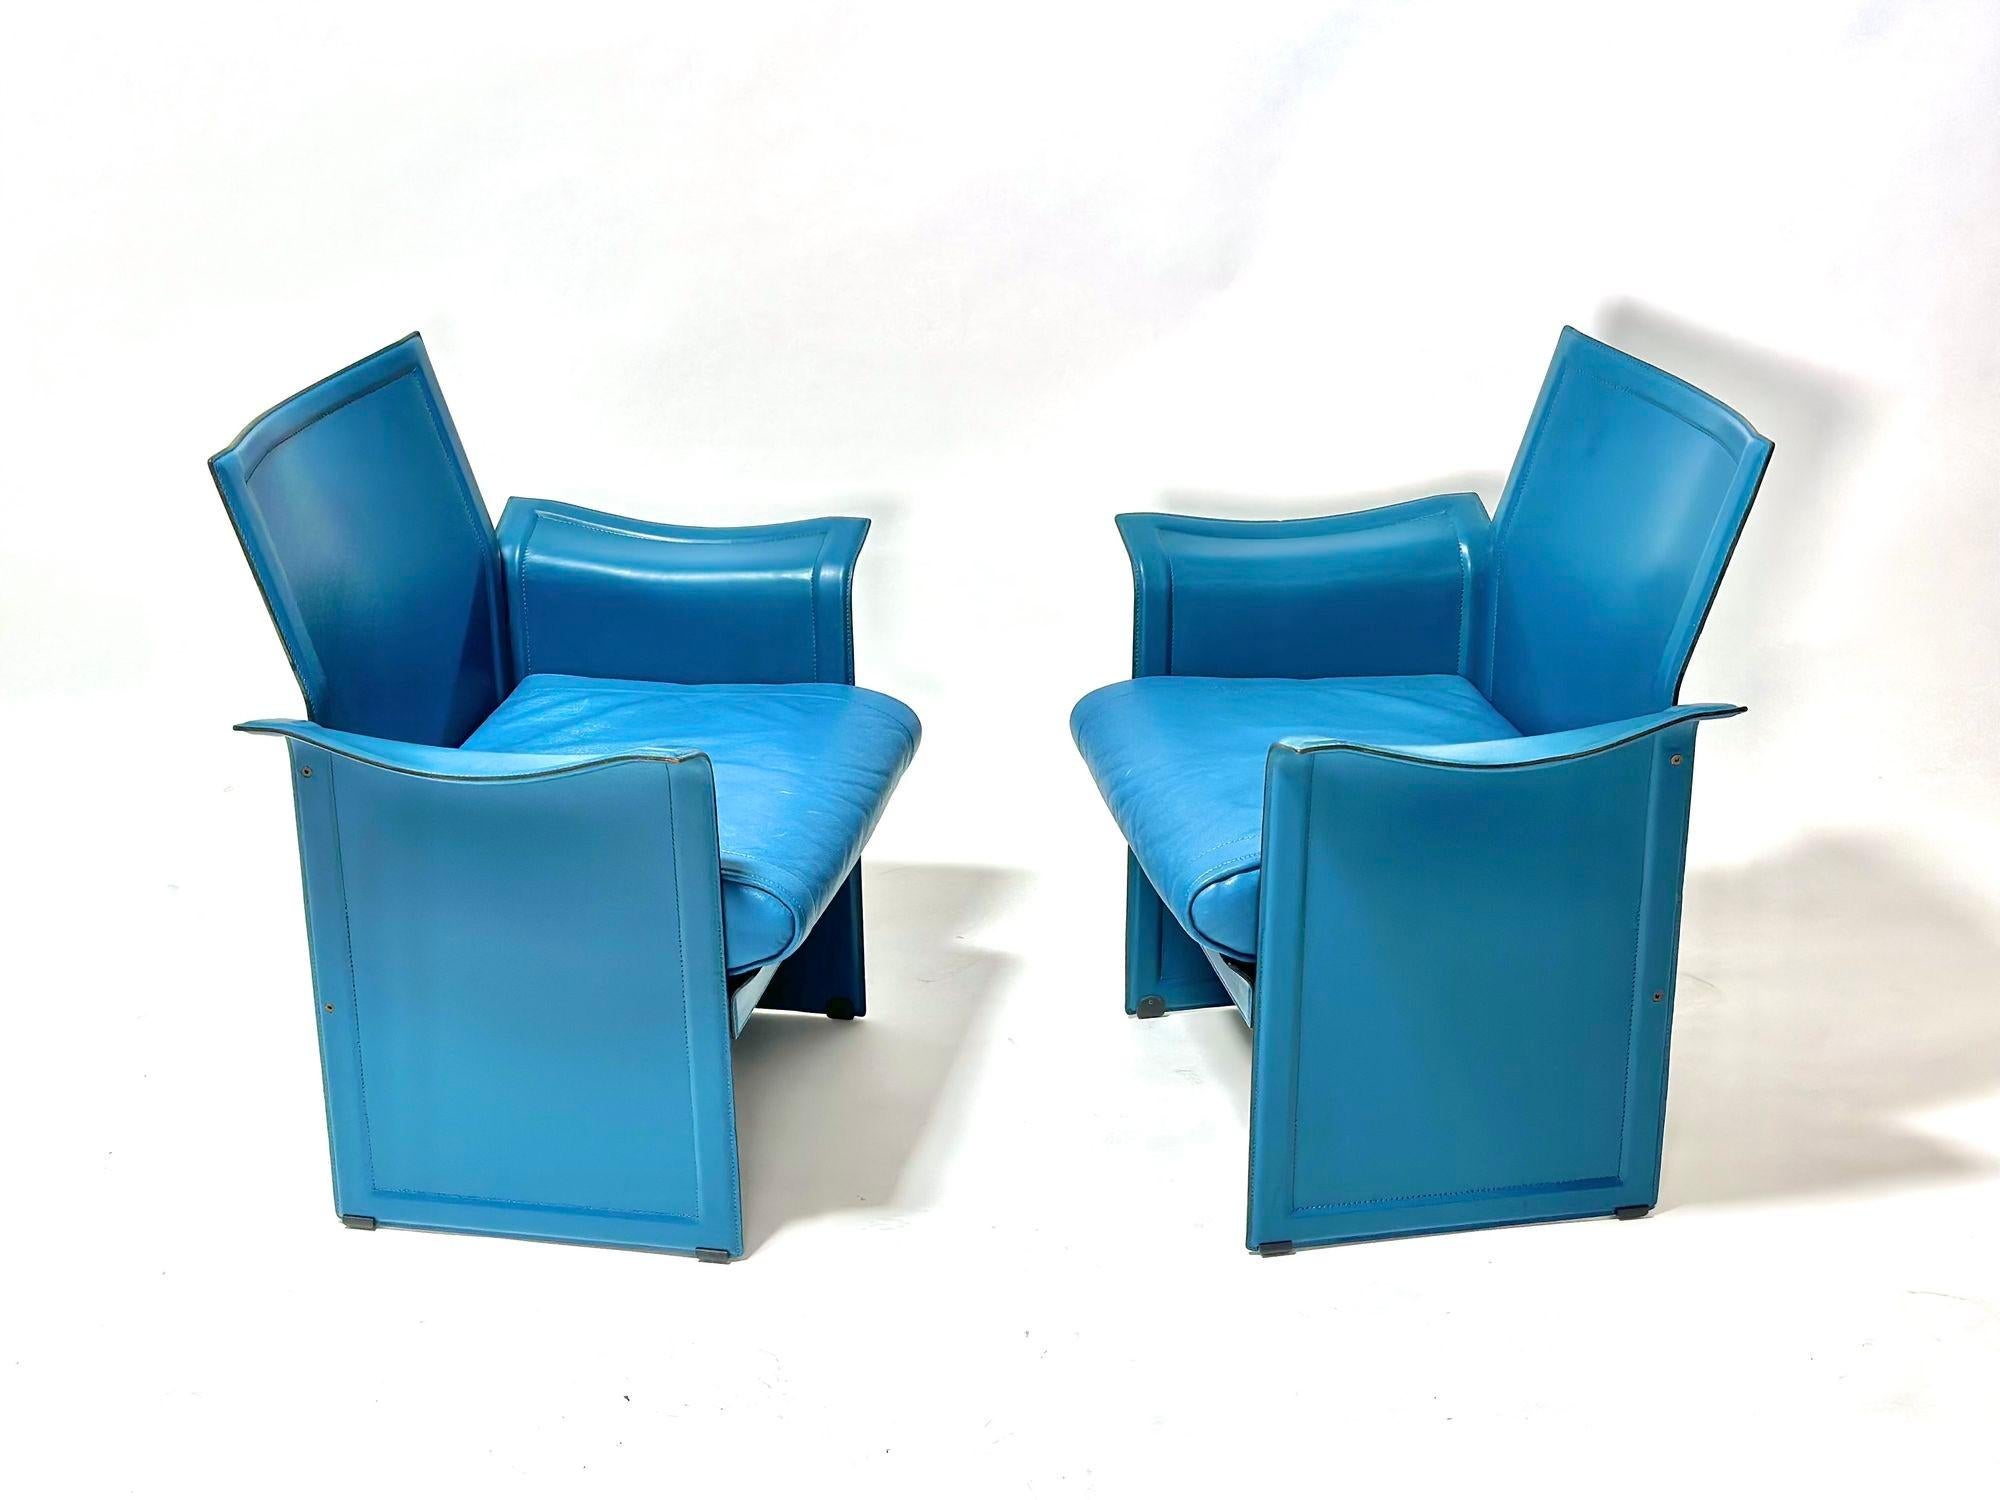 Matteo Grassi Pair Leather Lounge Chairs by Tito Agnoli. Italy 1980s. Original leather.